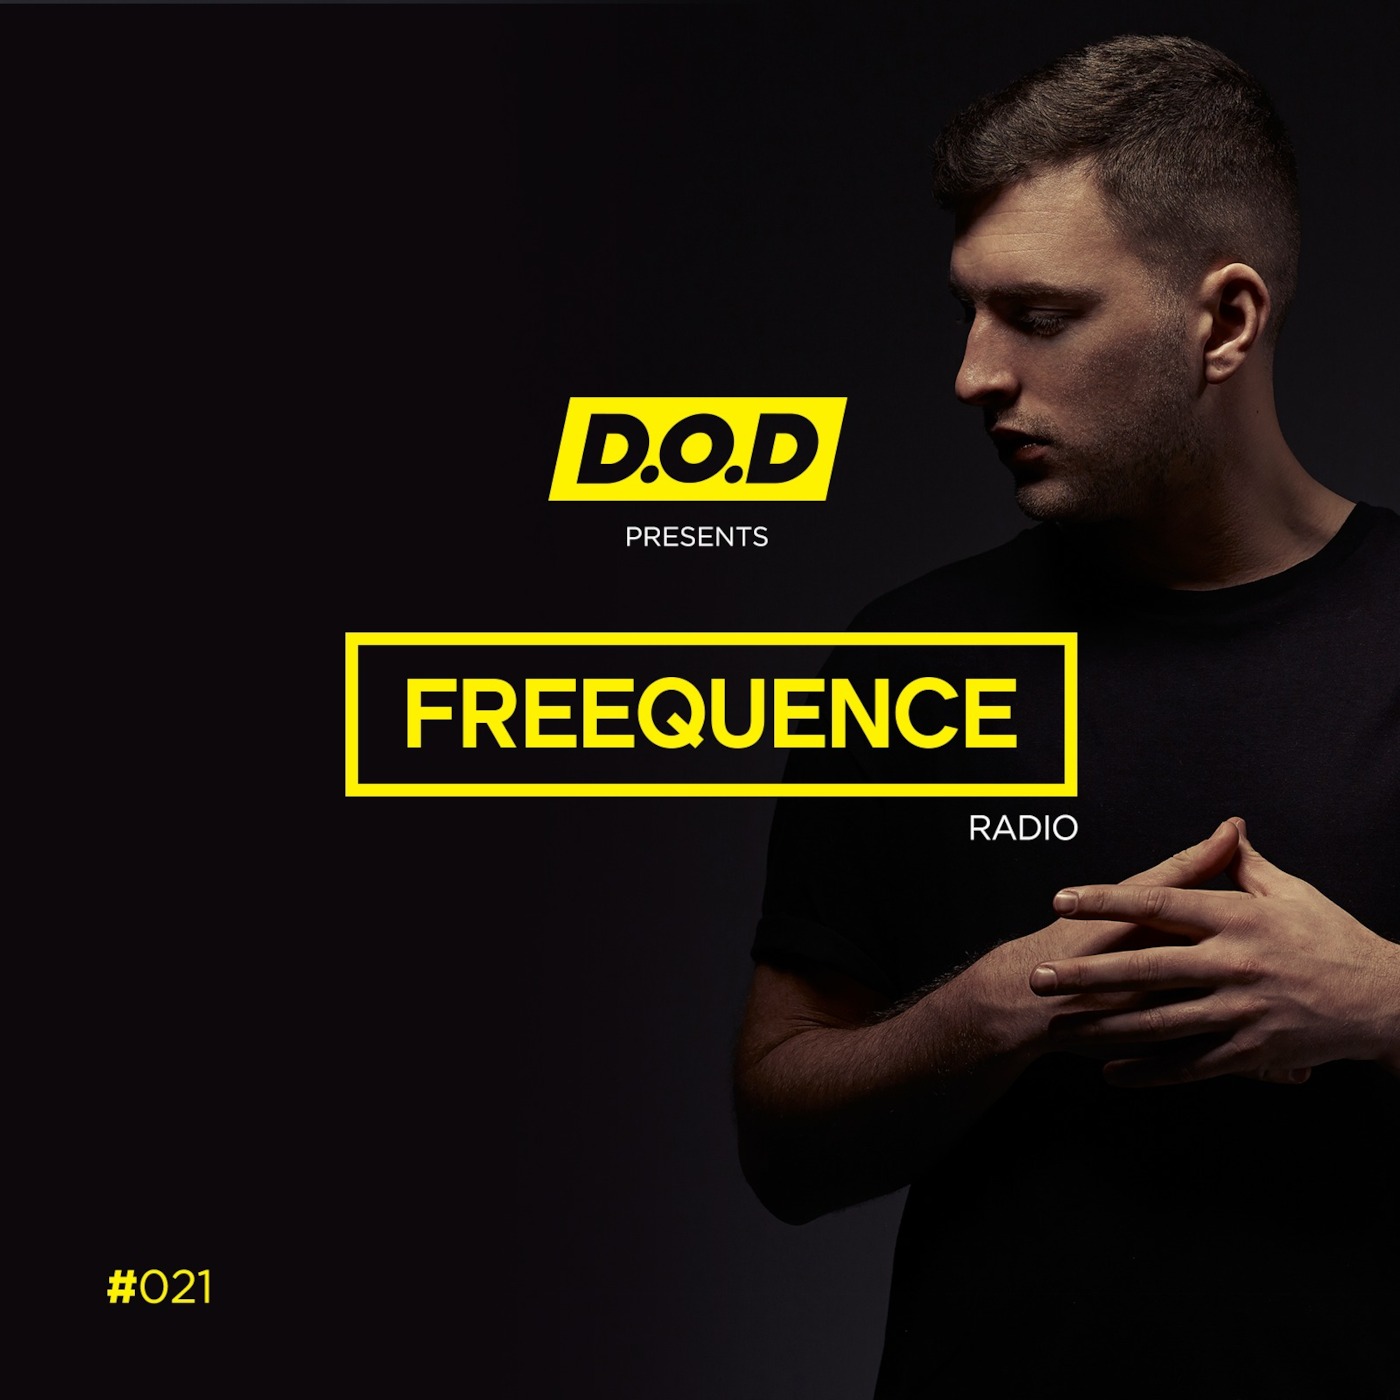 #FREEQUENCE Radio with D.O.D #021